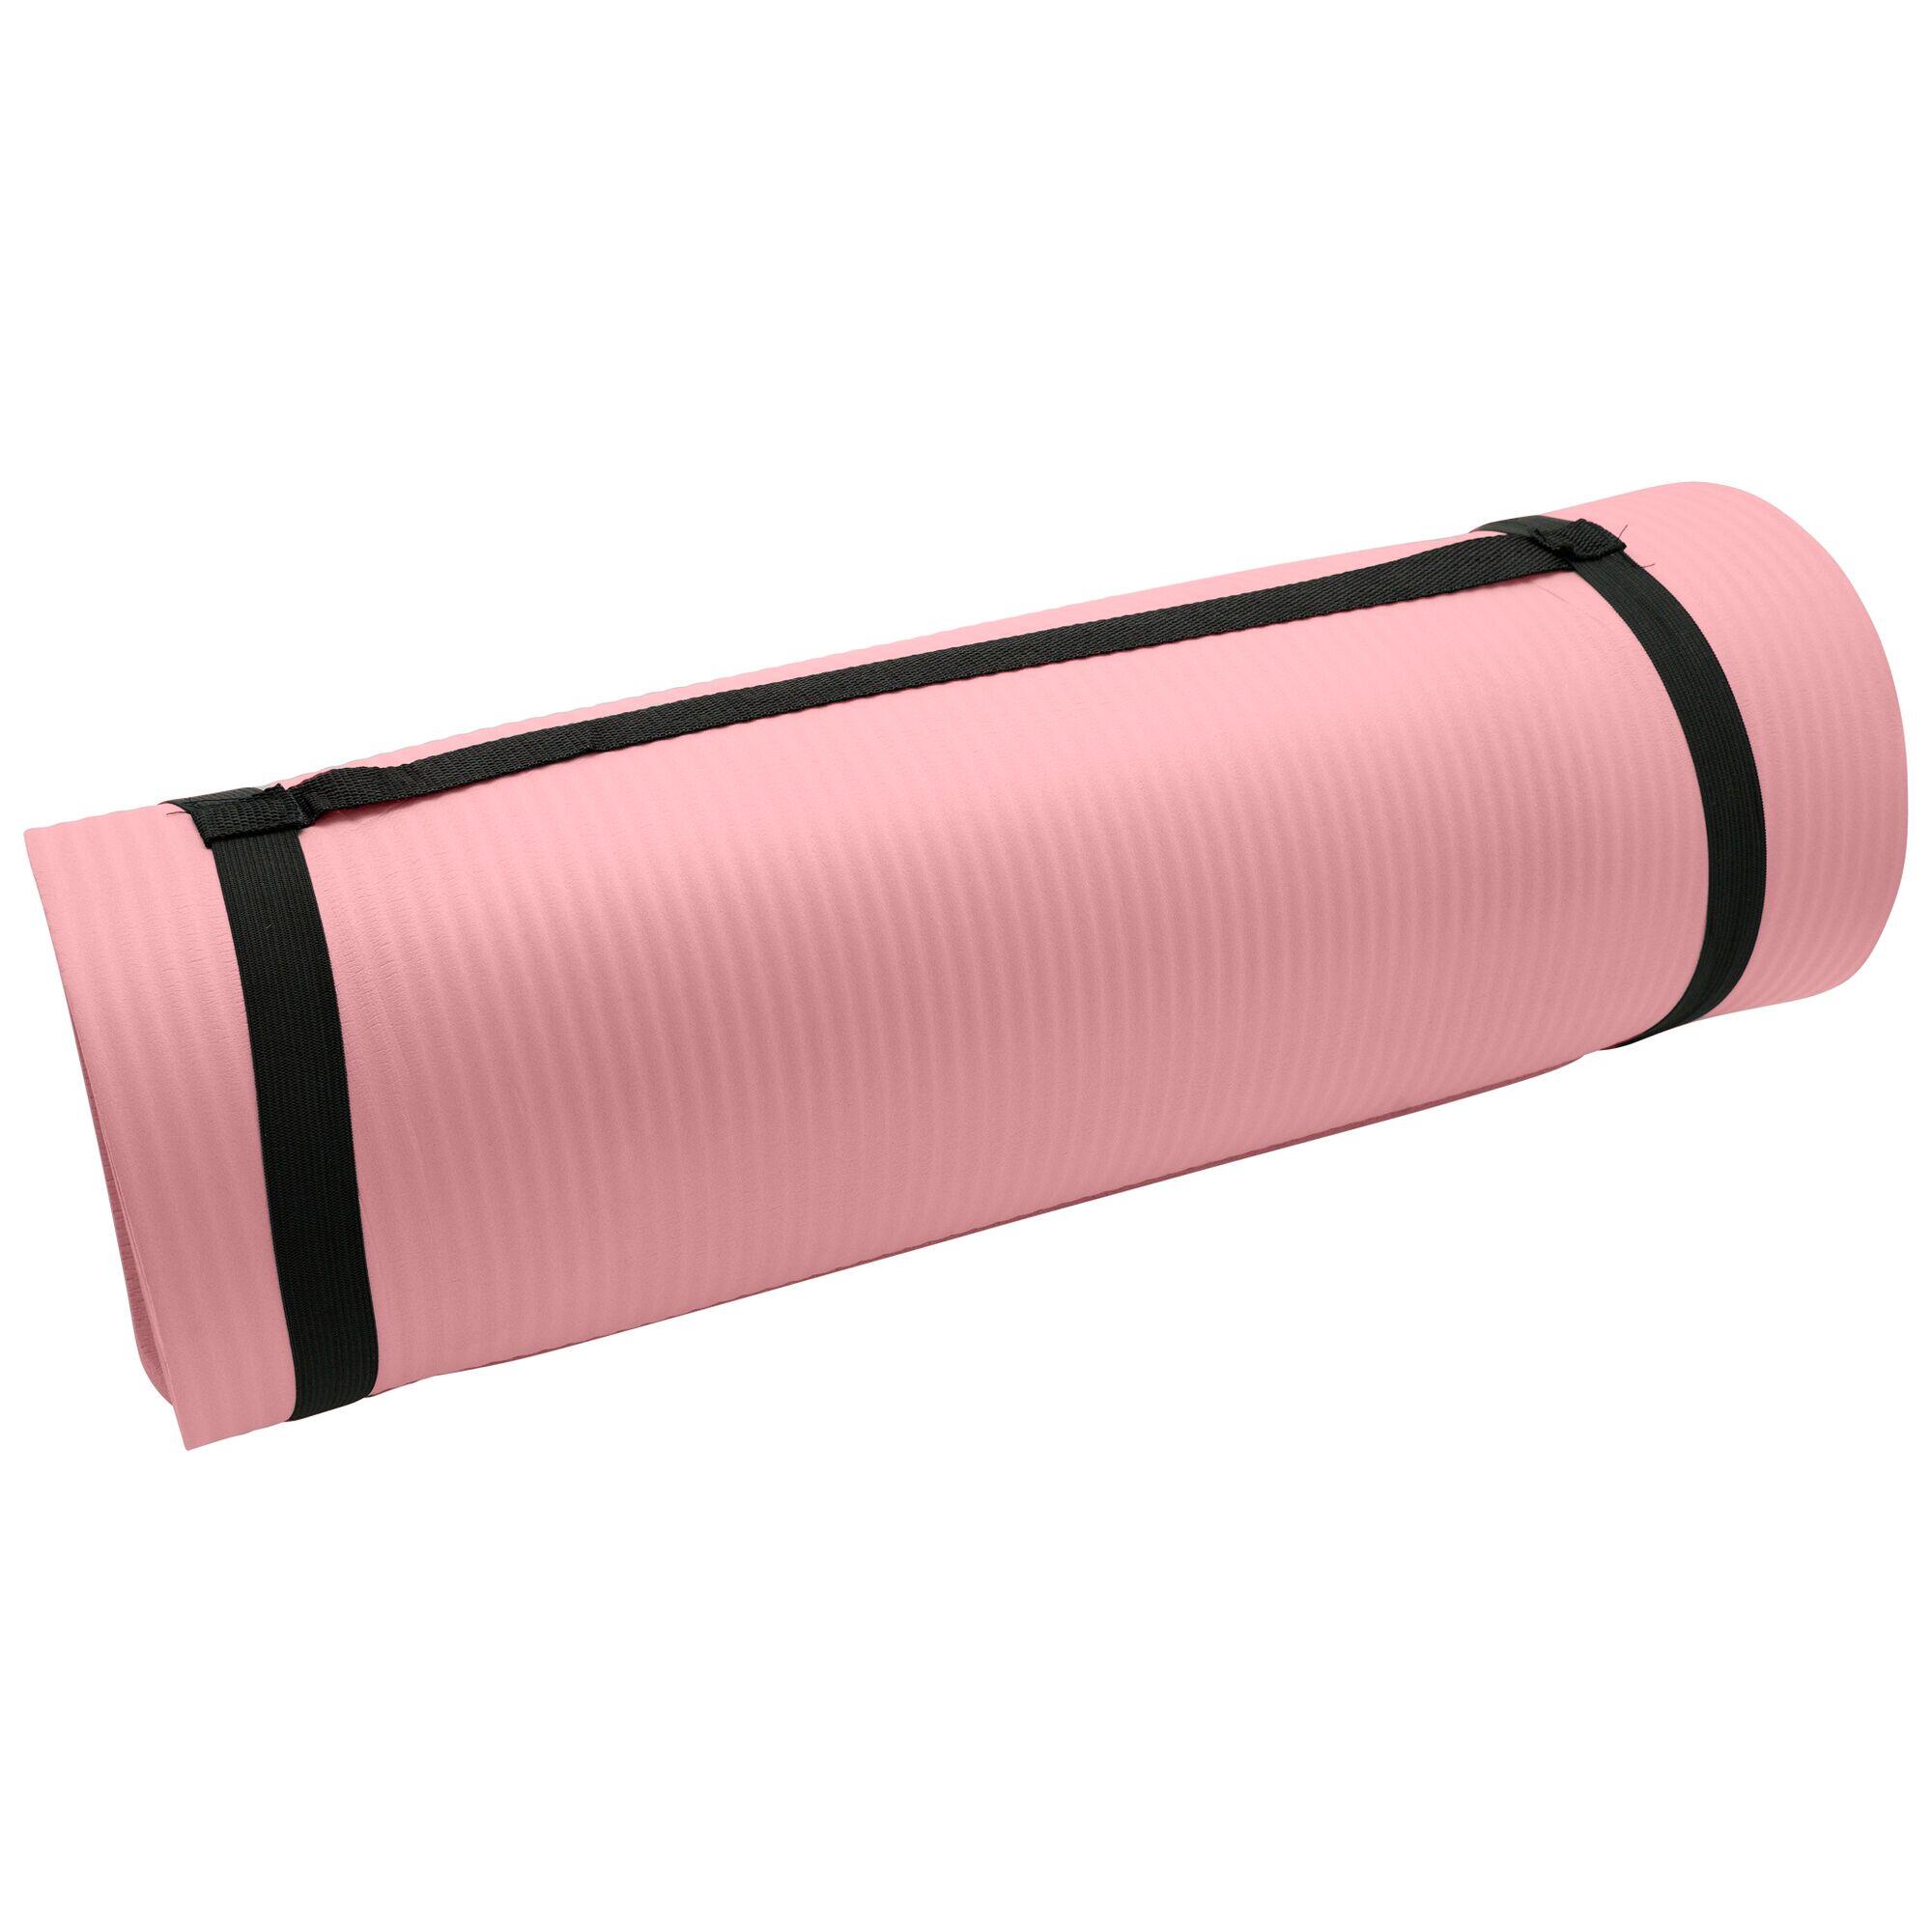 Adults' Home Fitness Yoga Mat - Pale Pink 3/4